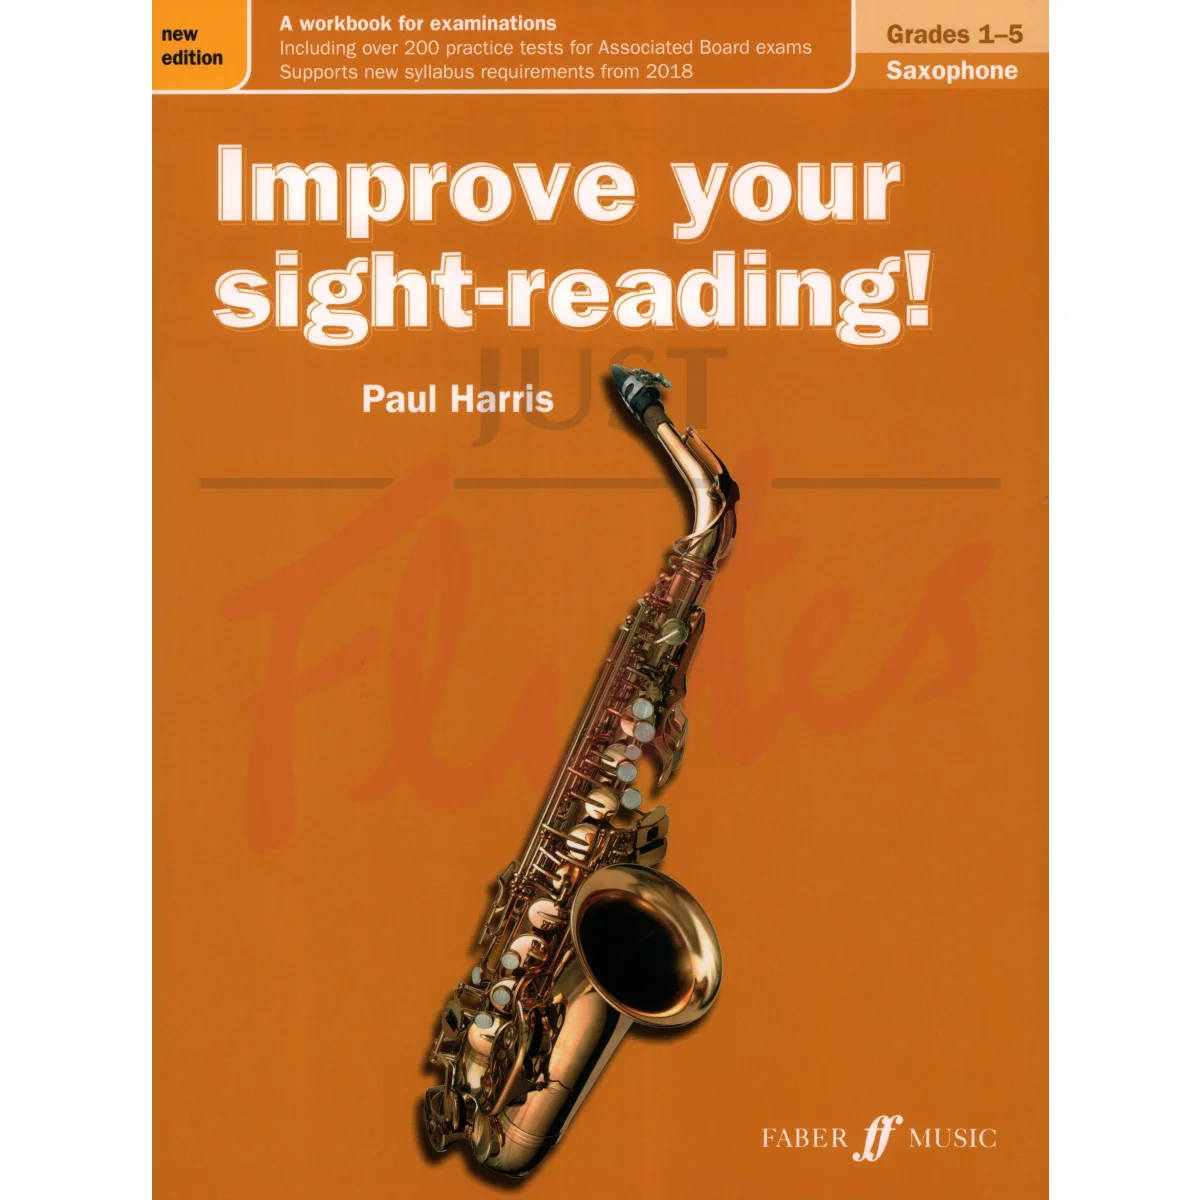 Improve Your Sight-Reading! [Saxophone] Grades 1-5 ABRSM from 2018